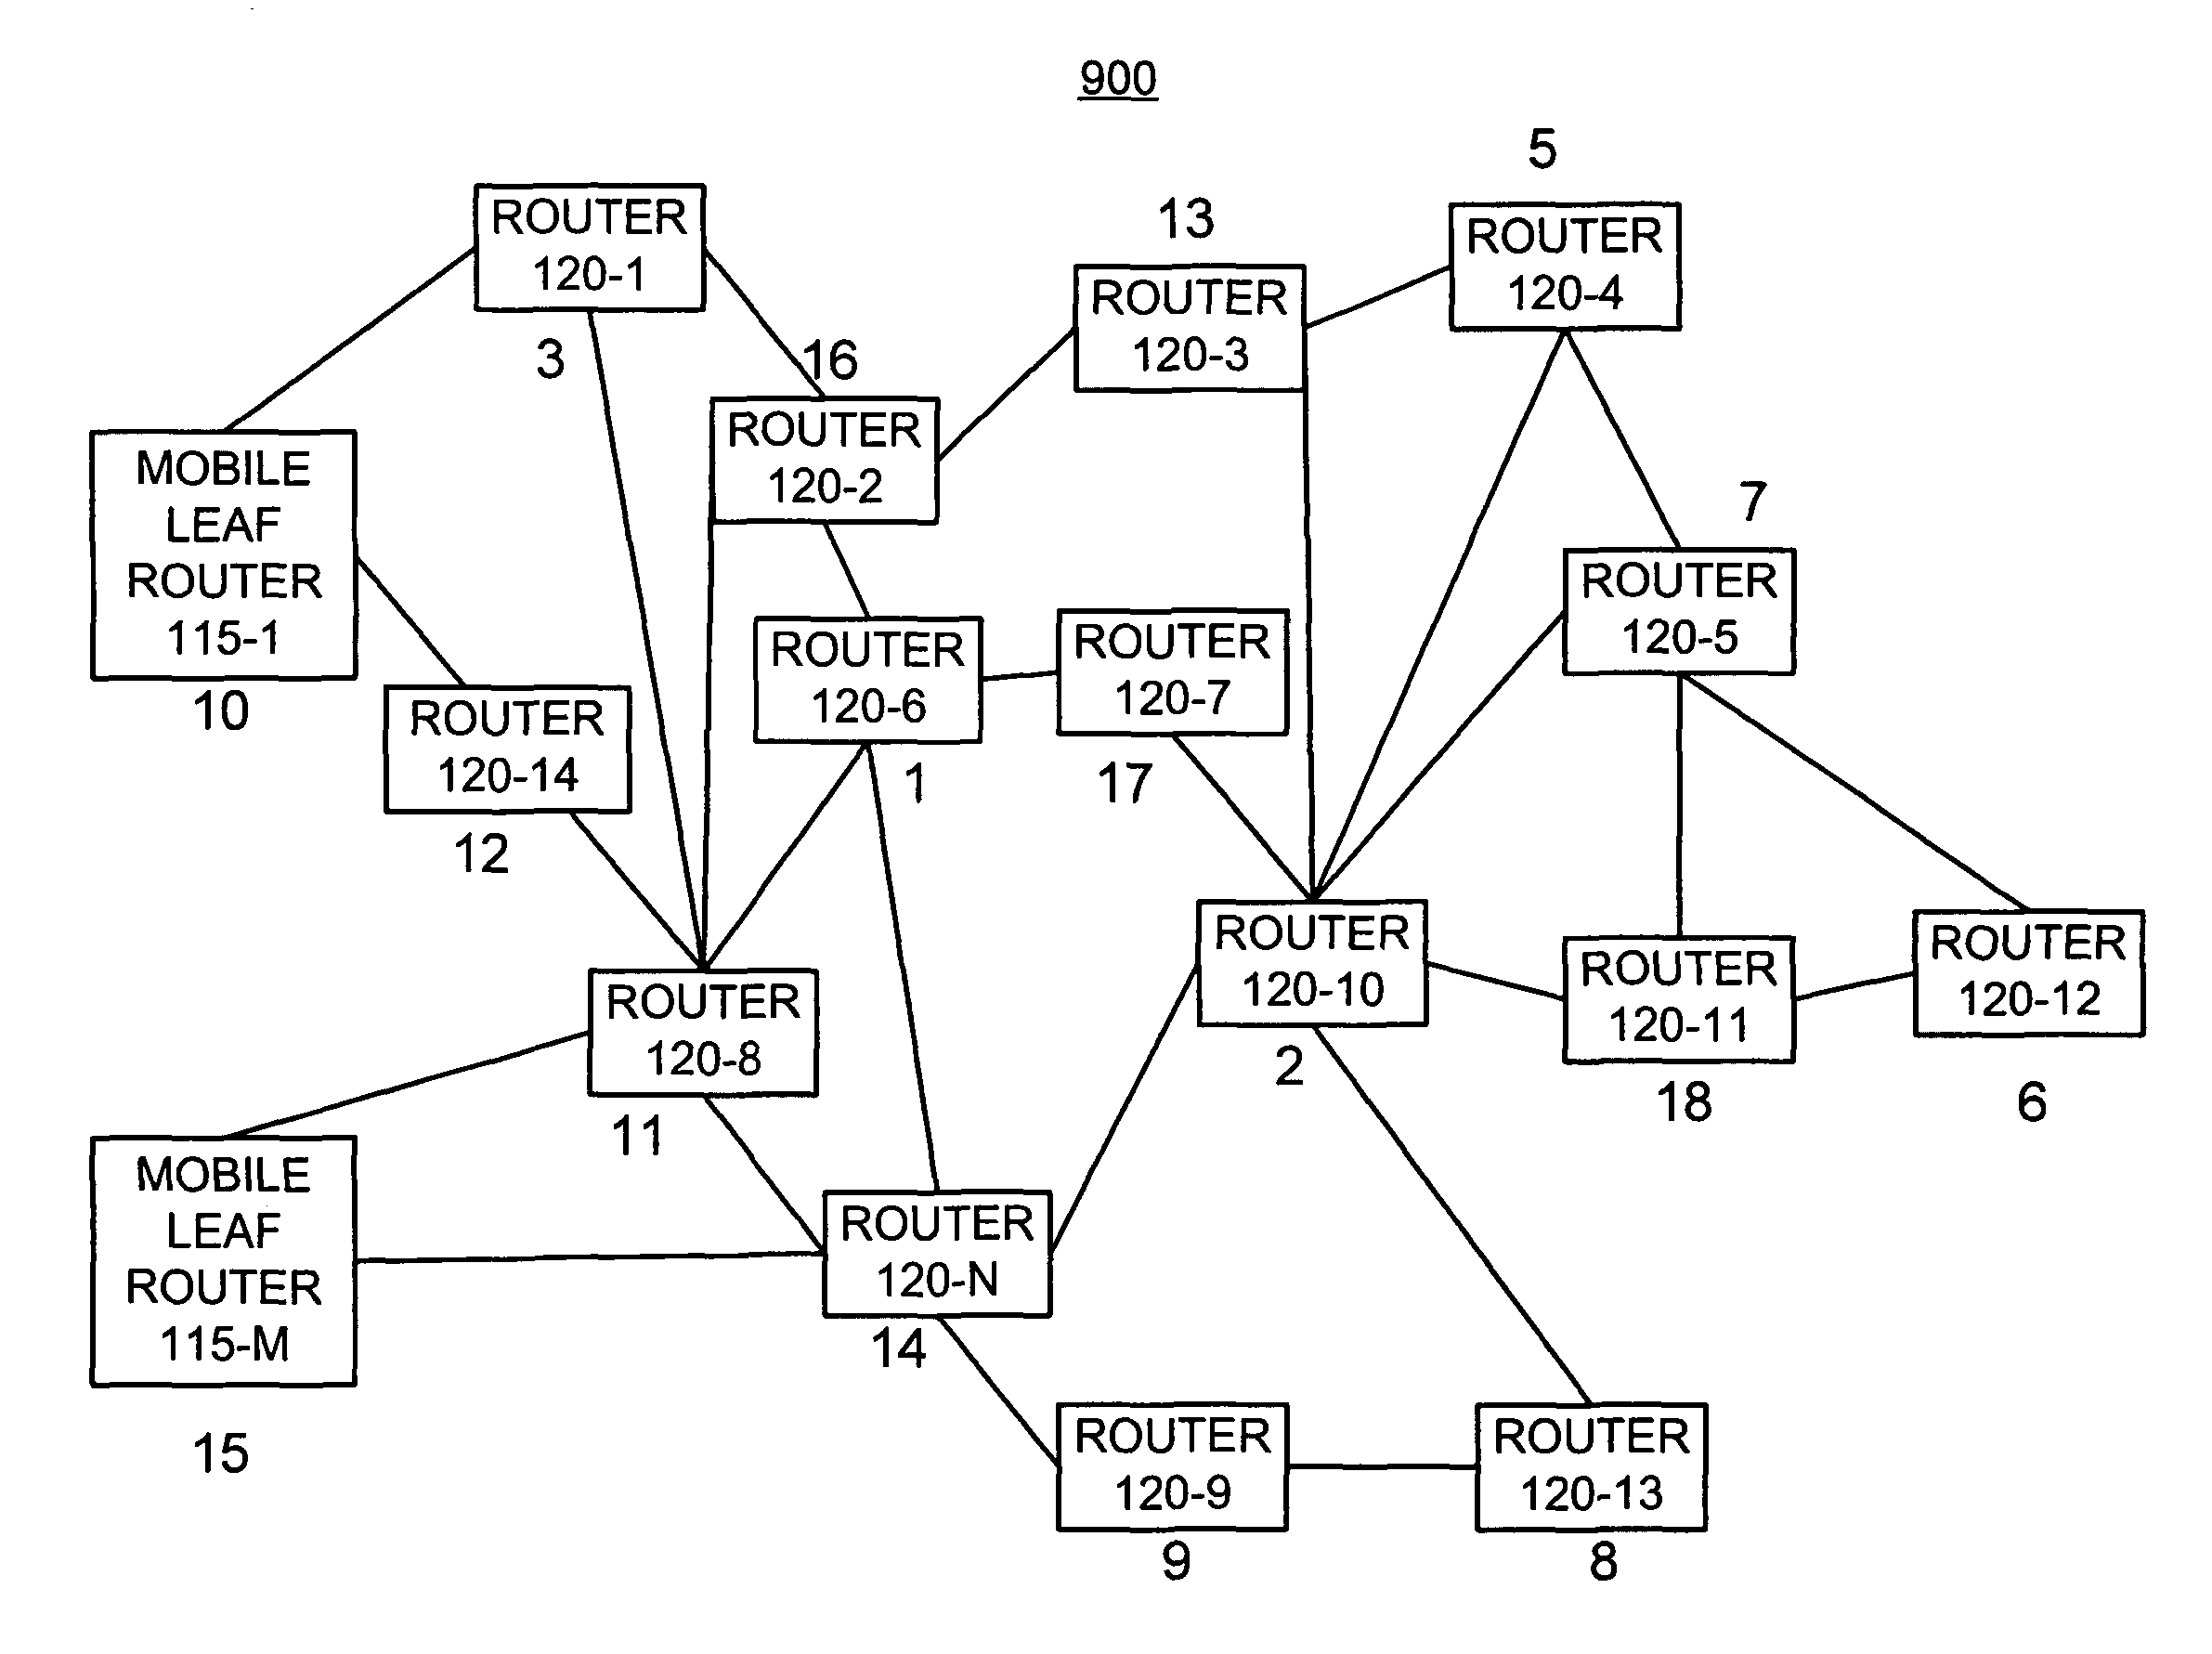 Systems and methods for forming an adjacency graph for exchanging network routing data